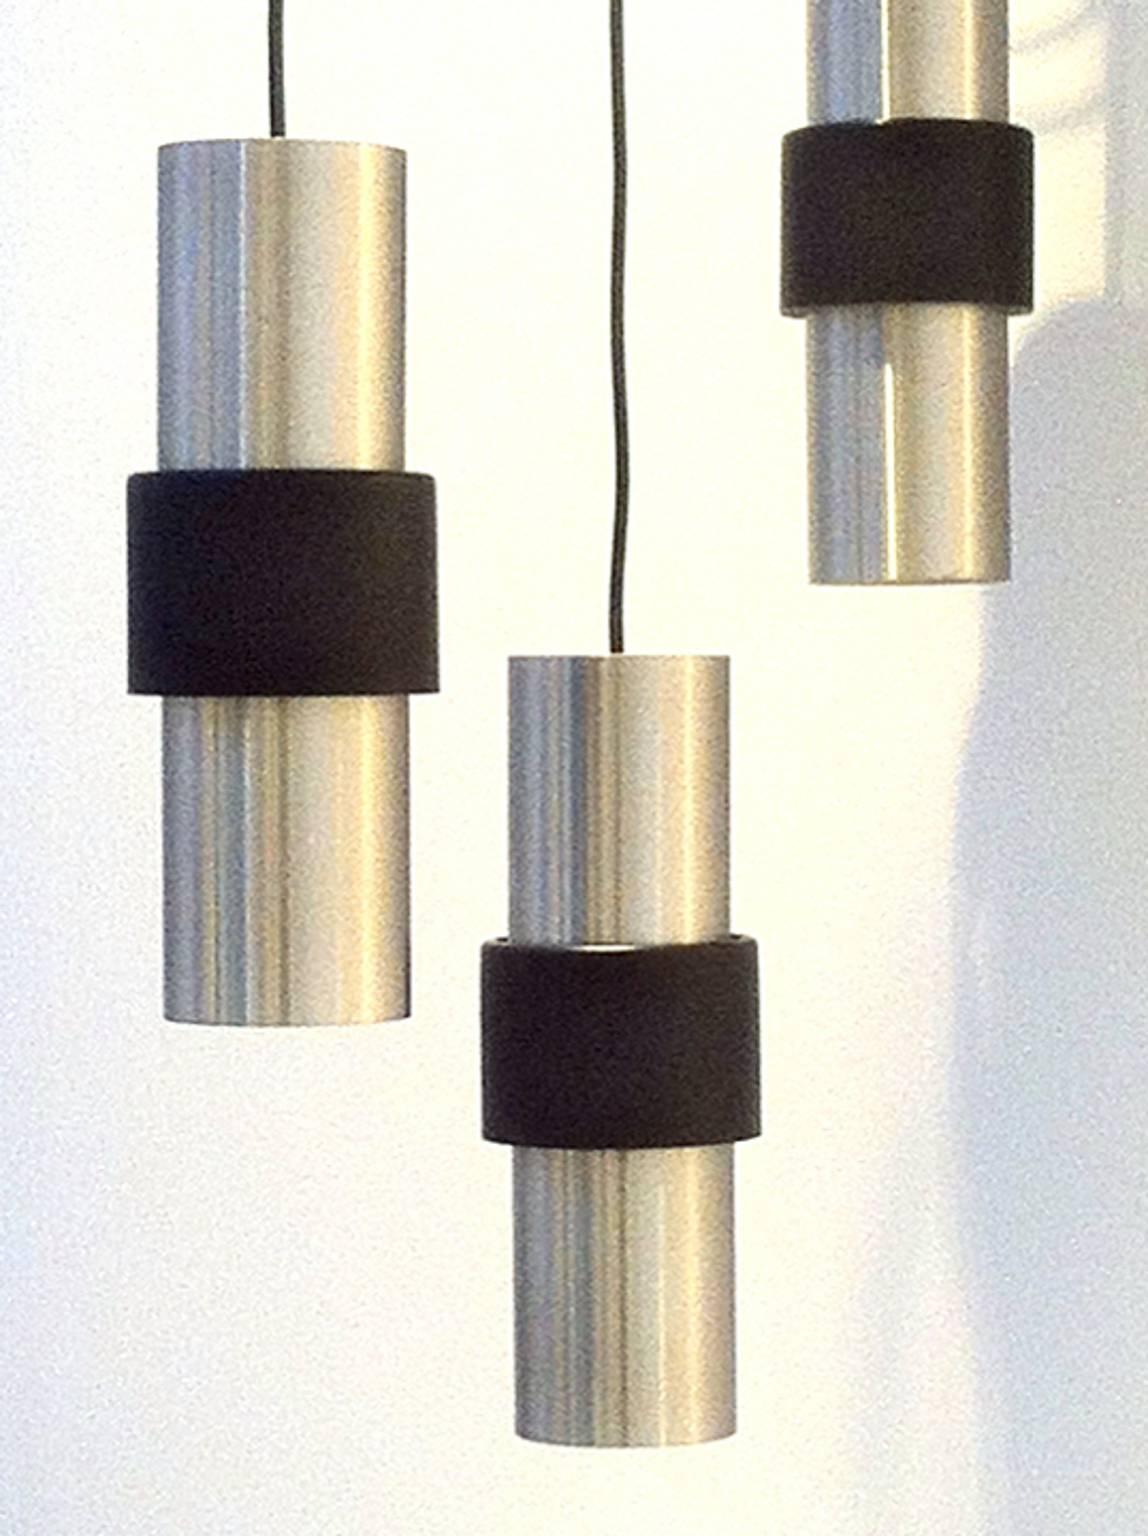 Set of three elegant pendant lights by RAAK of the Netherlands, 1960s.

These lights are made of brushed aluminium with a black lacquered band which floats away from the body allowing light to filter both up and down (this also provide access to